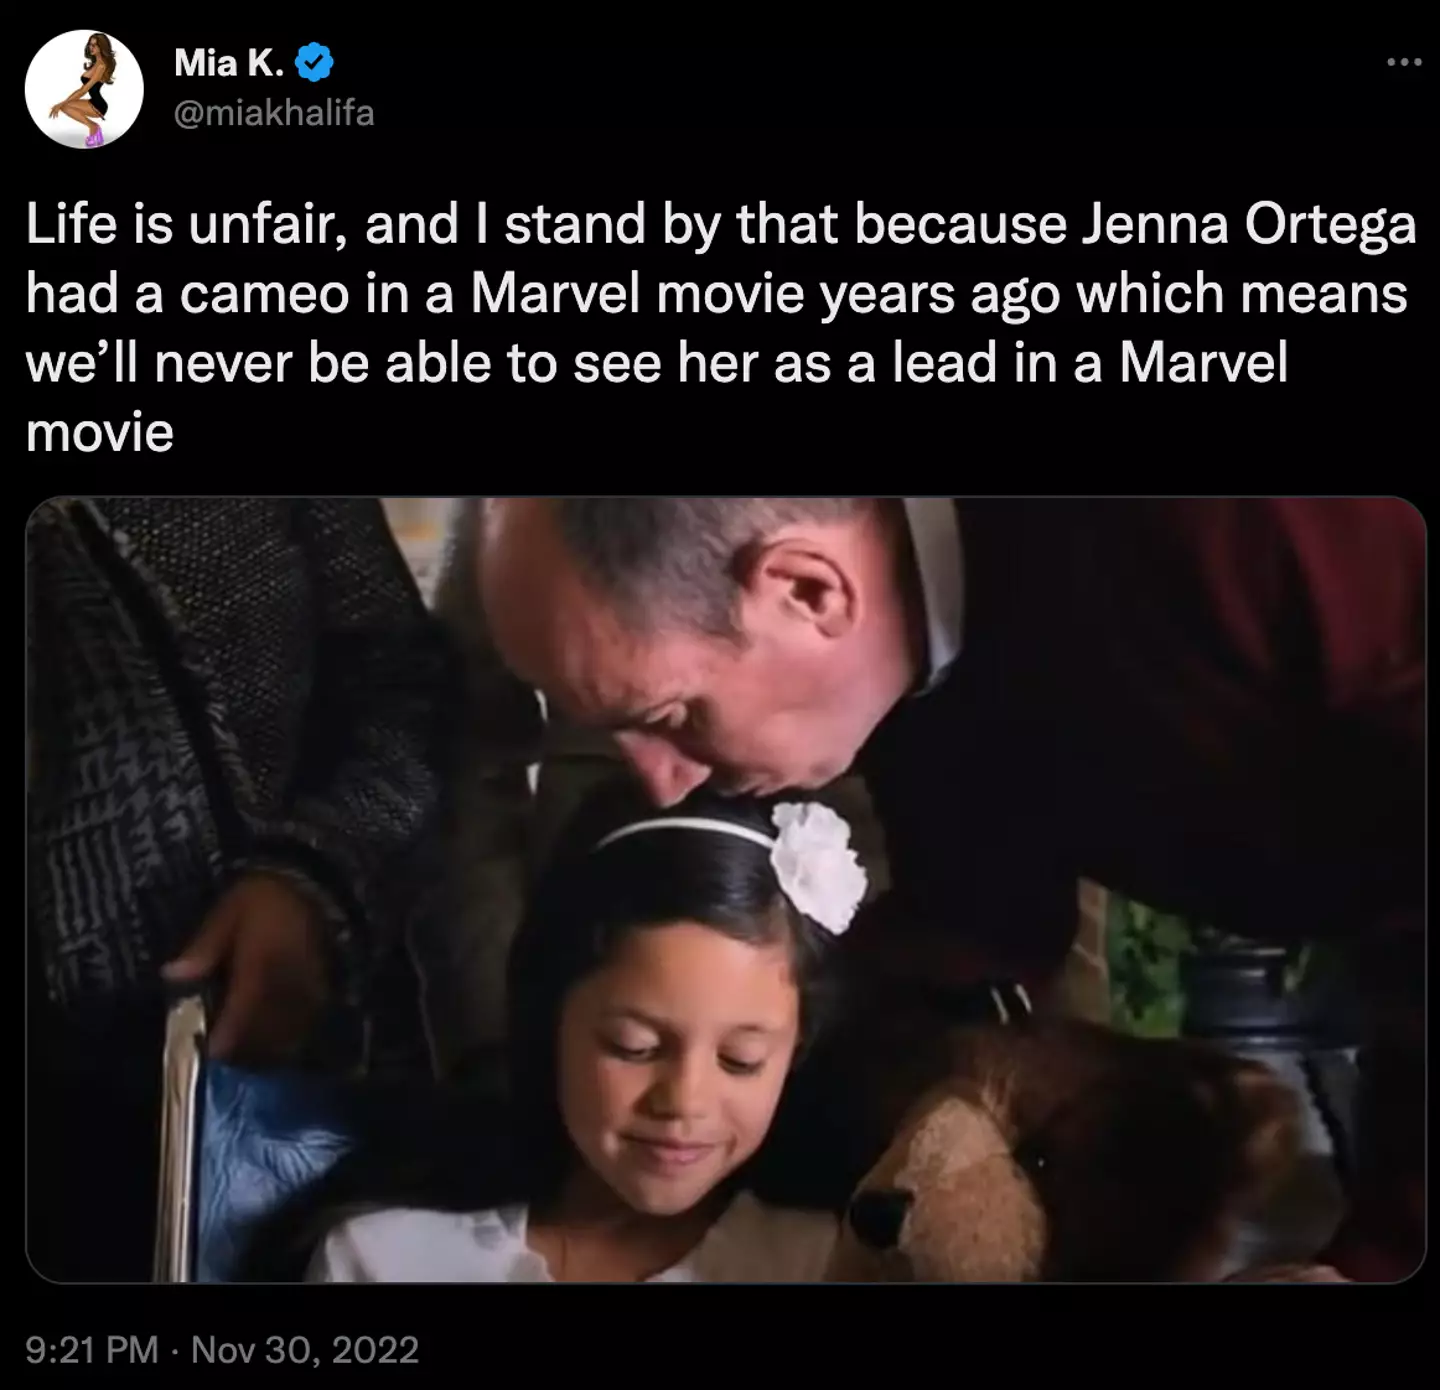 Mia Khalifa has questioned whether or not Ortega will be able to star in a Marvel movie after having previously featured in one.